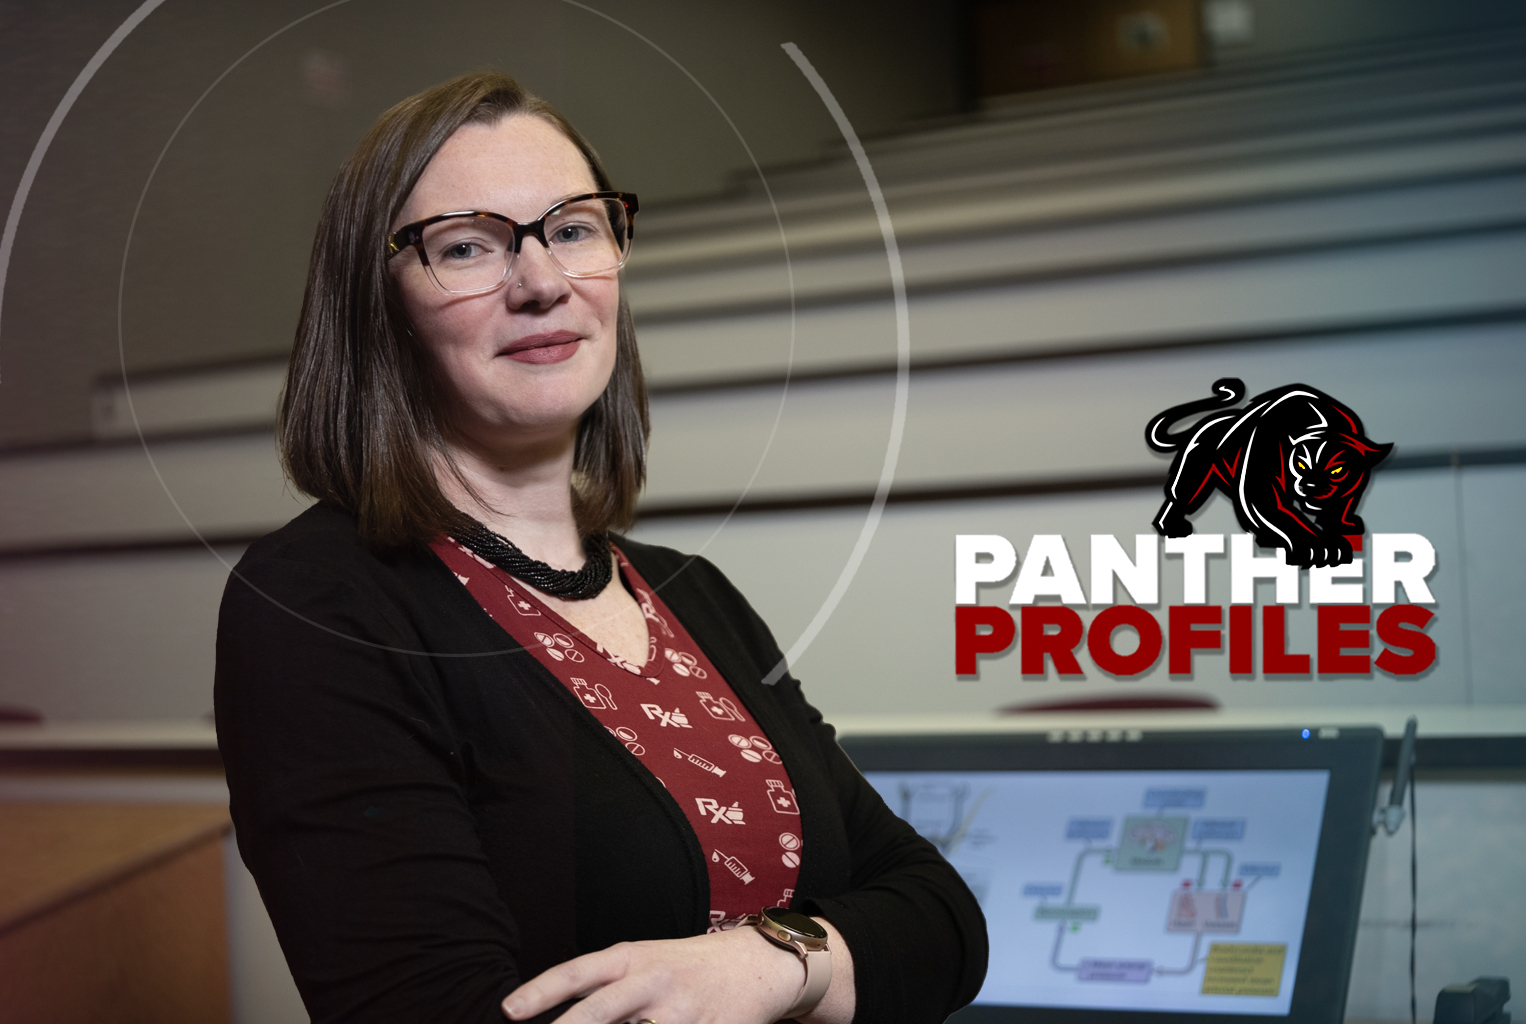 Dr. Nicole Shakerley in a Panther Profile frame